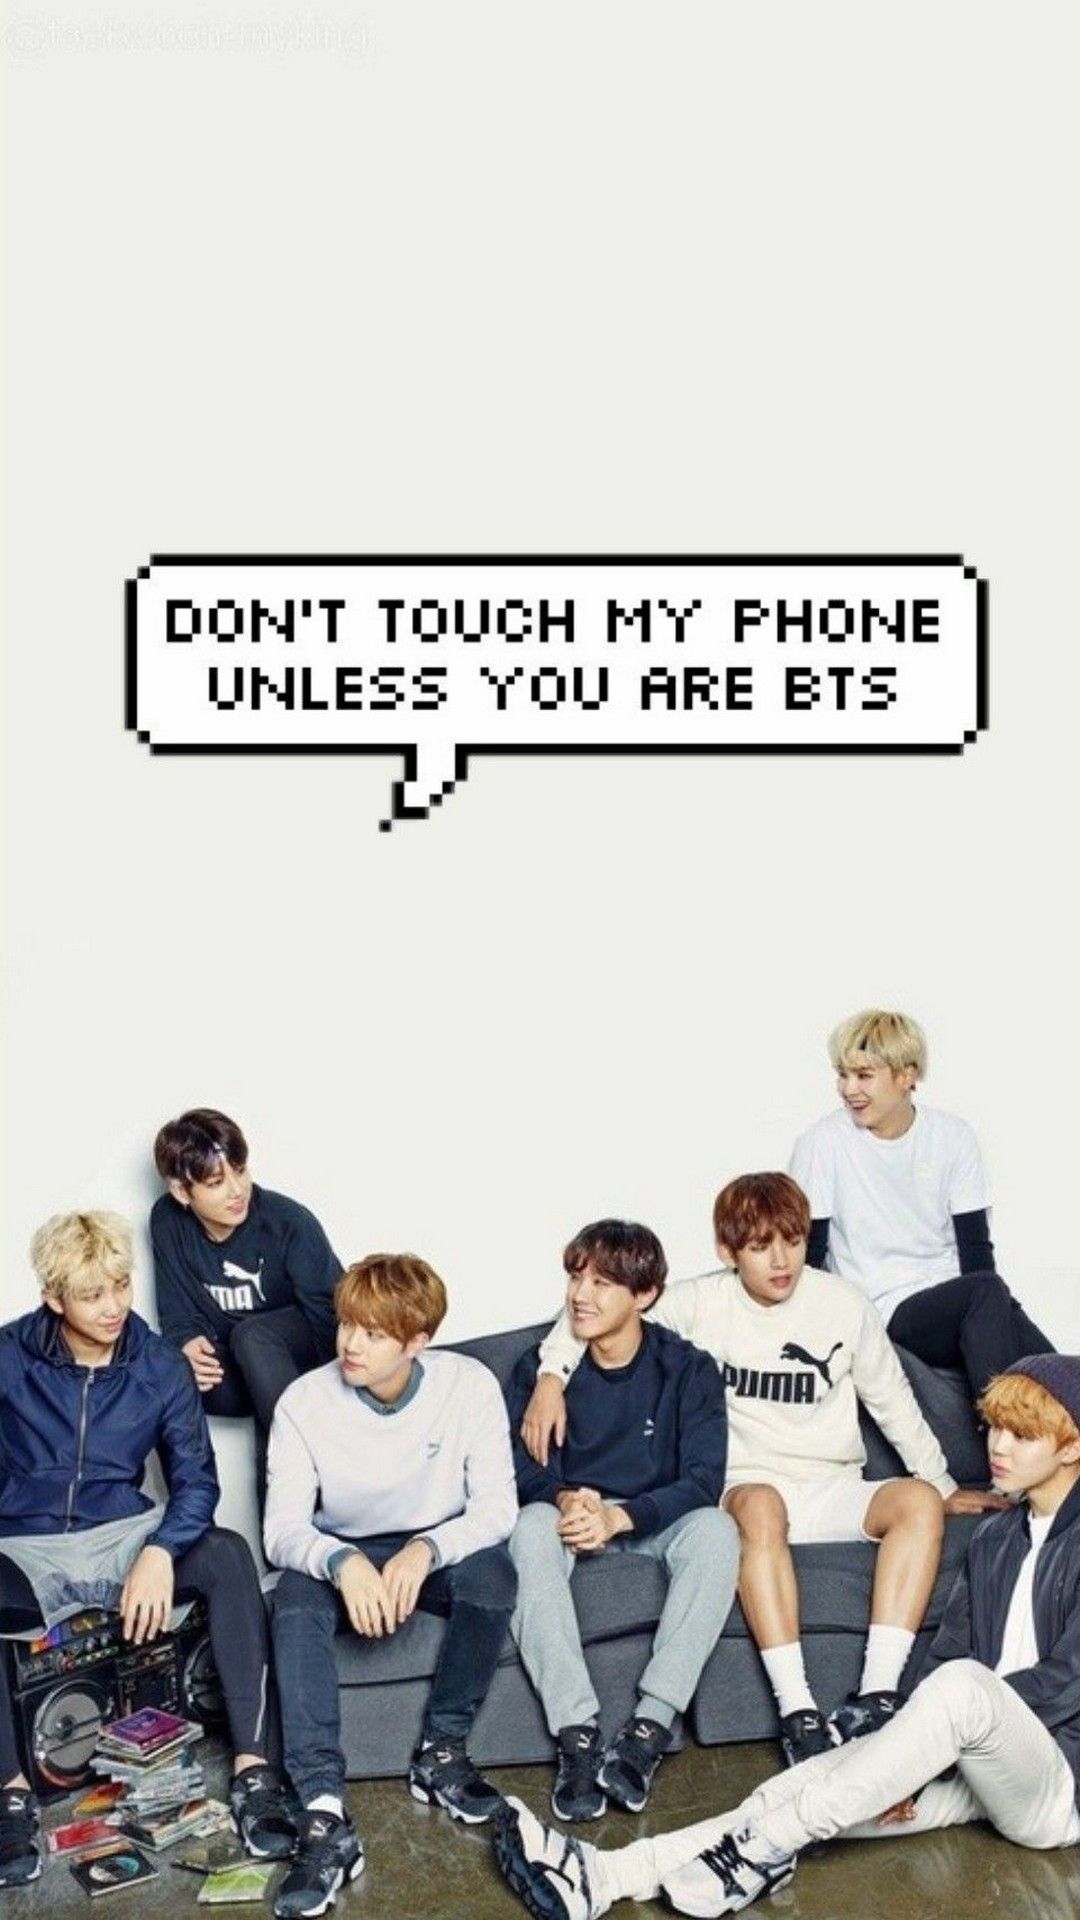 Free download BTS iPhone Home Screen Wallpaper 2020 Cute iPhone